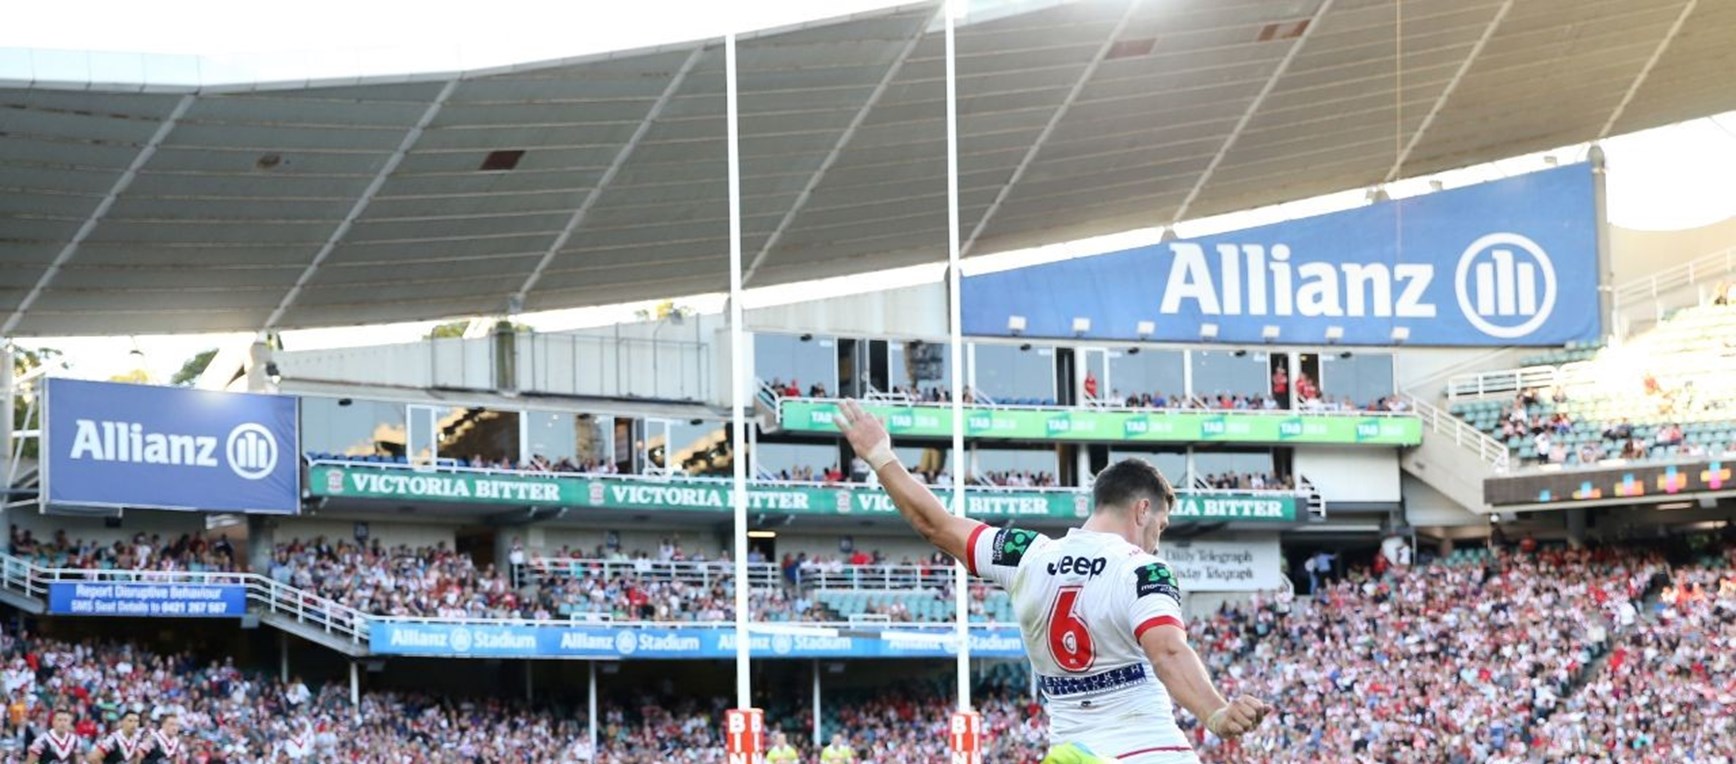 Gallery: Round 8 v Sydney Roosters